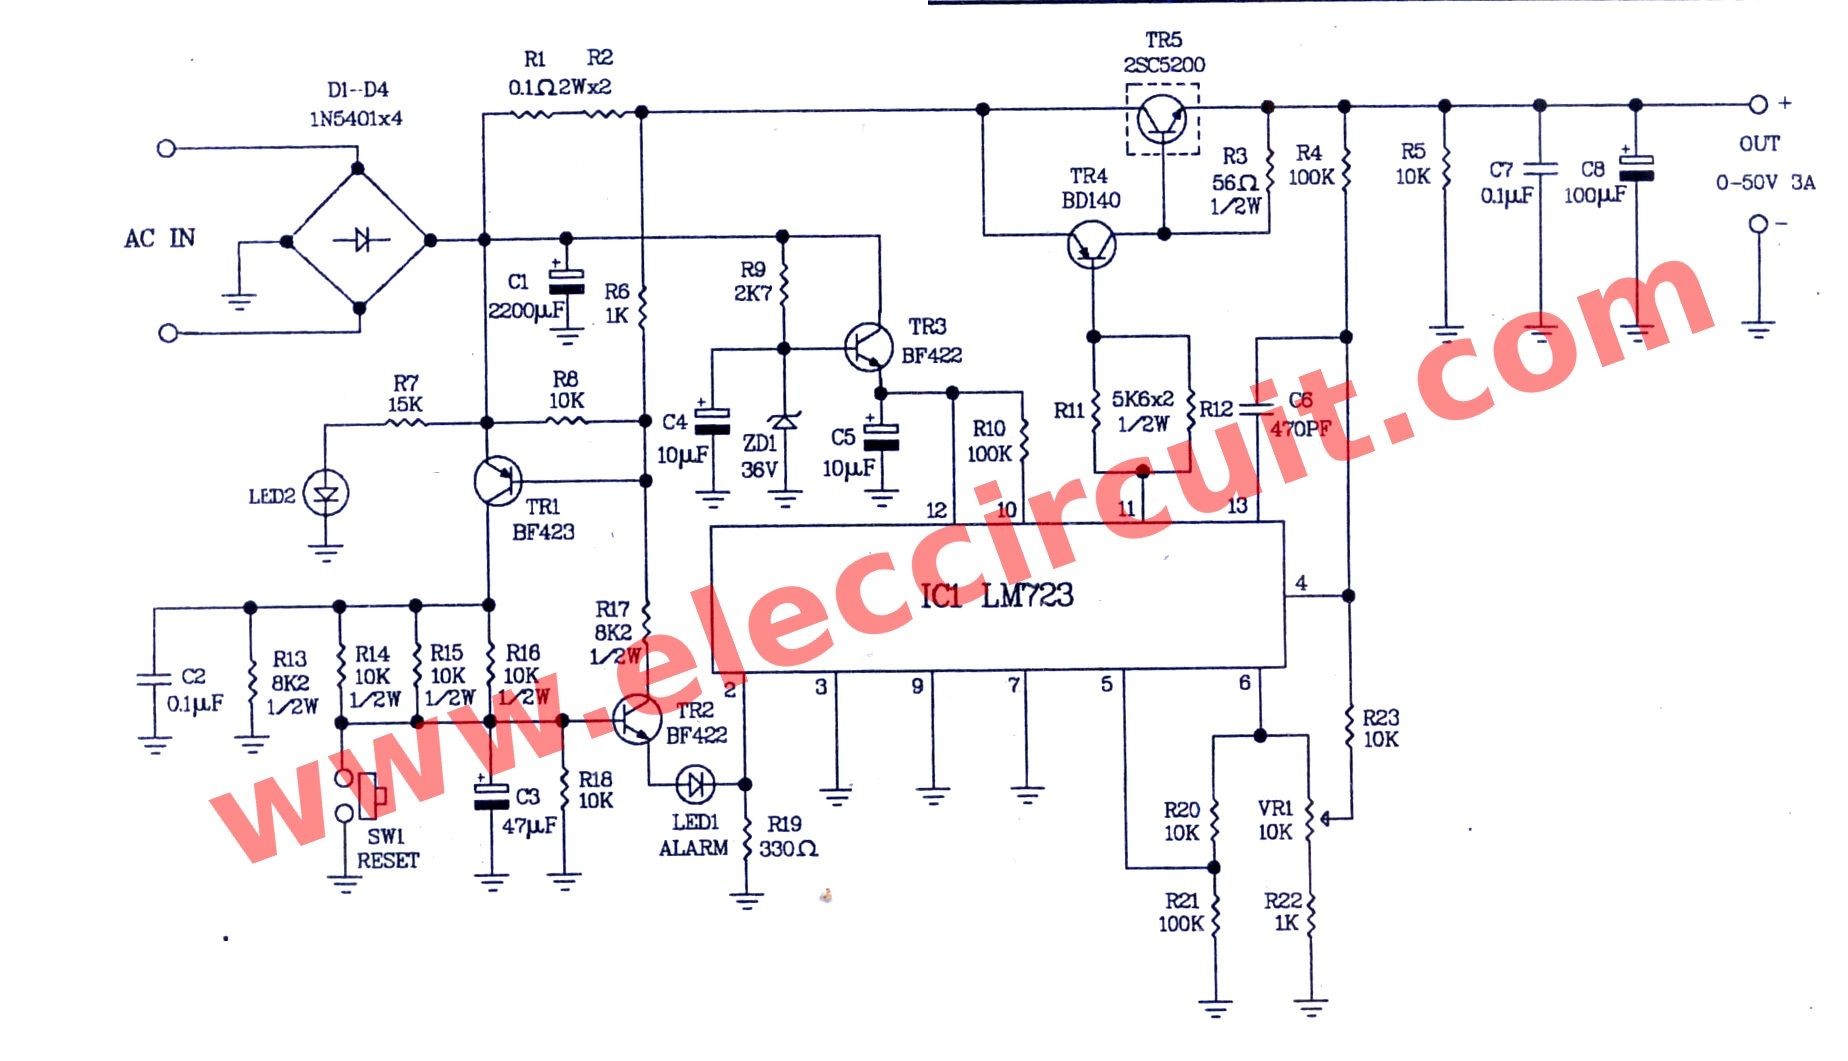 ponent 0 50v Variable Power Supply Circuit At 3a 100 Kv High Voltage The Diagram Kit Low Ac Radio Shack Diy Build Dc New Hp Atx Pwm Using Lm317 From